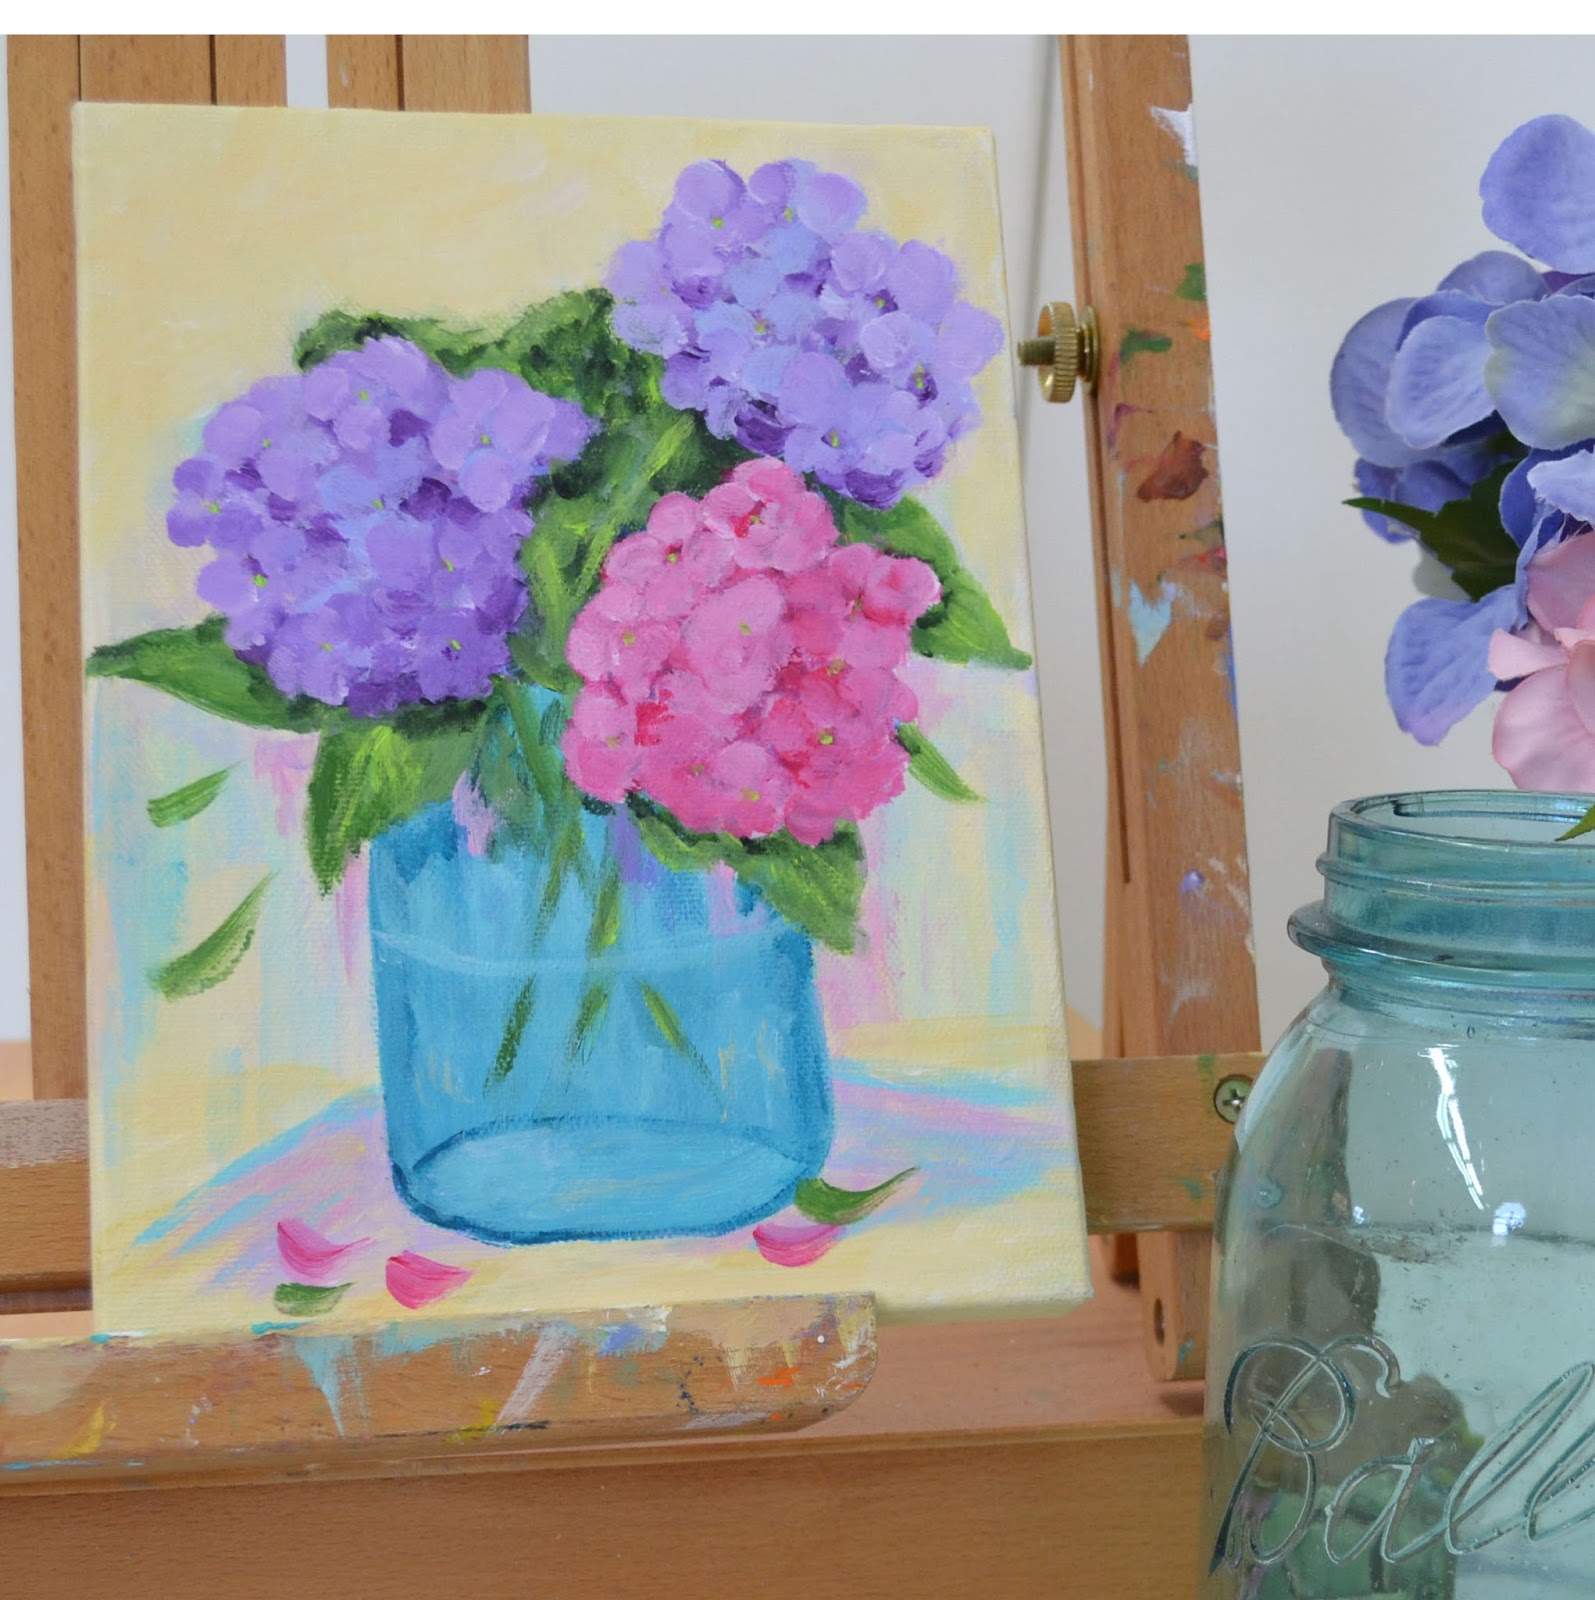 My Painted Garden: Painting Blue and White Inspirations